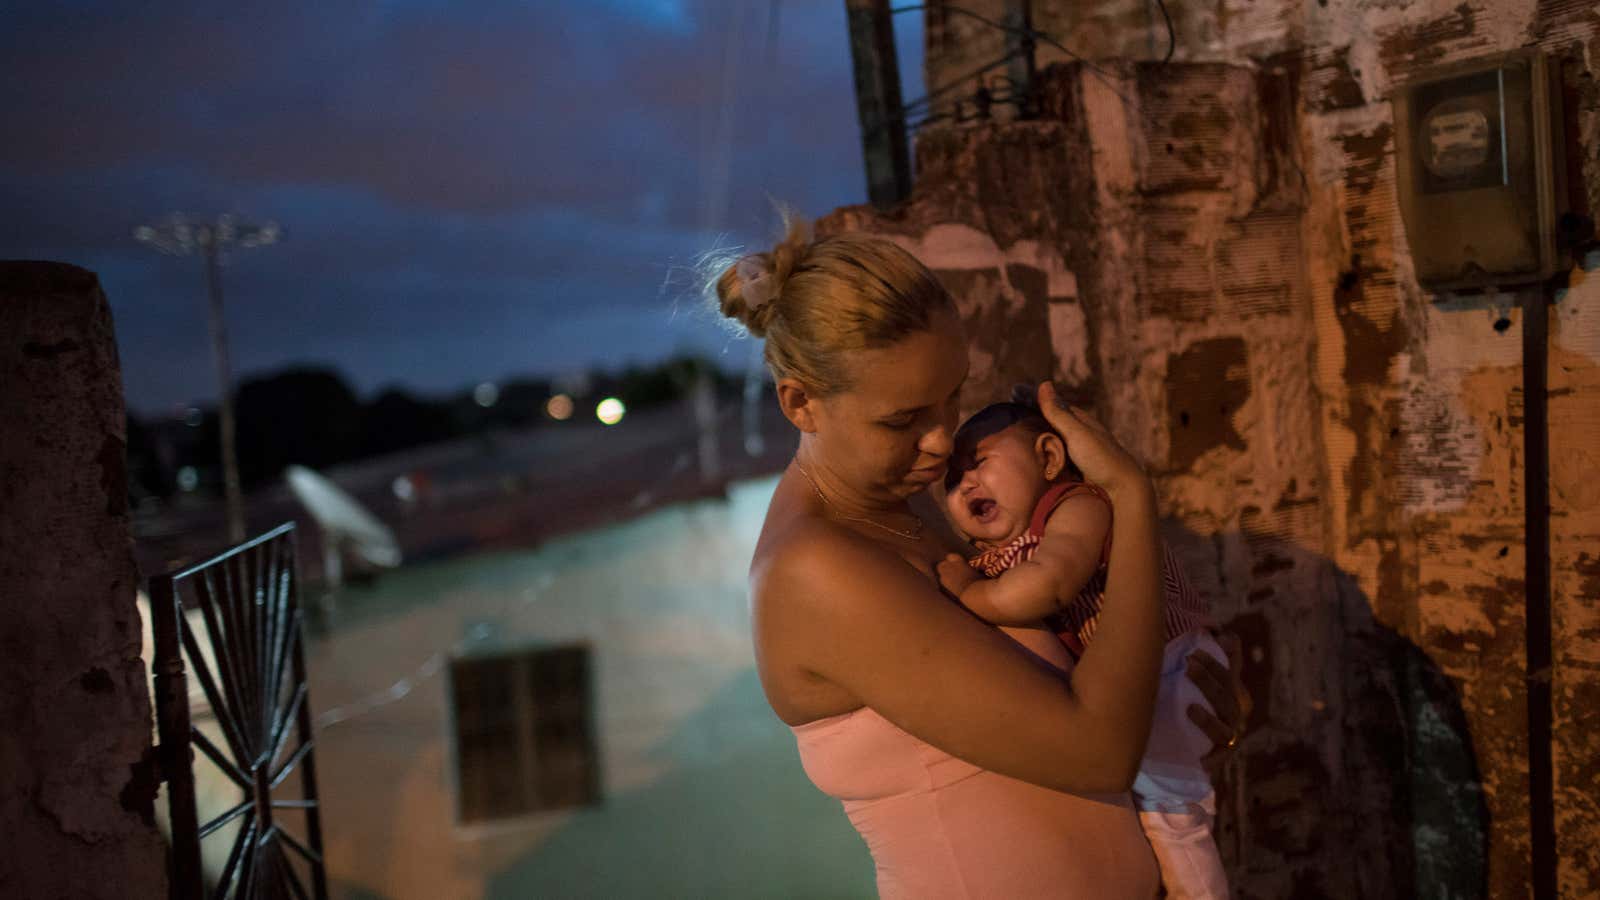 Many pregnant women around the world are alarmed by the resurgence of the Zika virus.